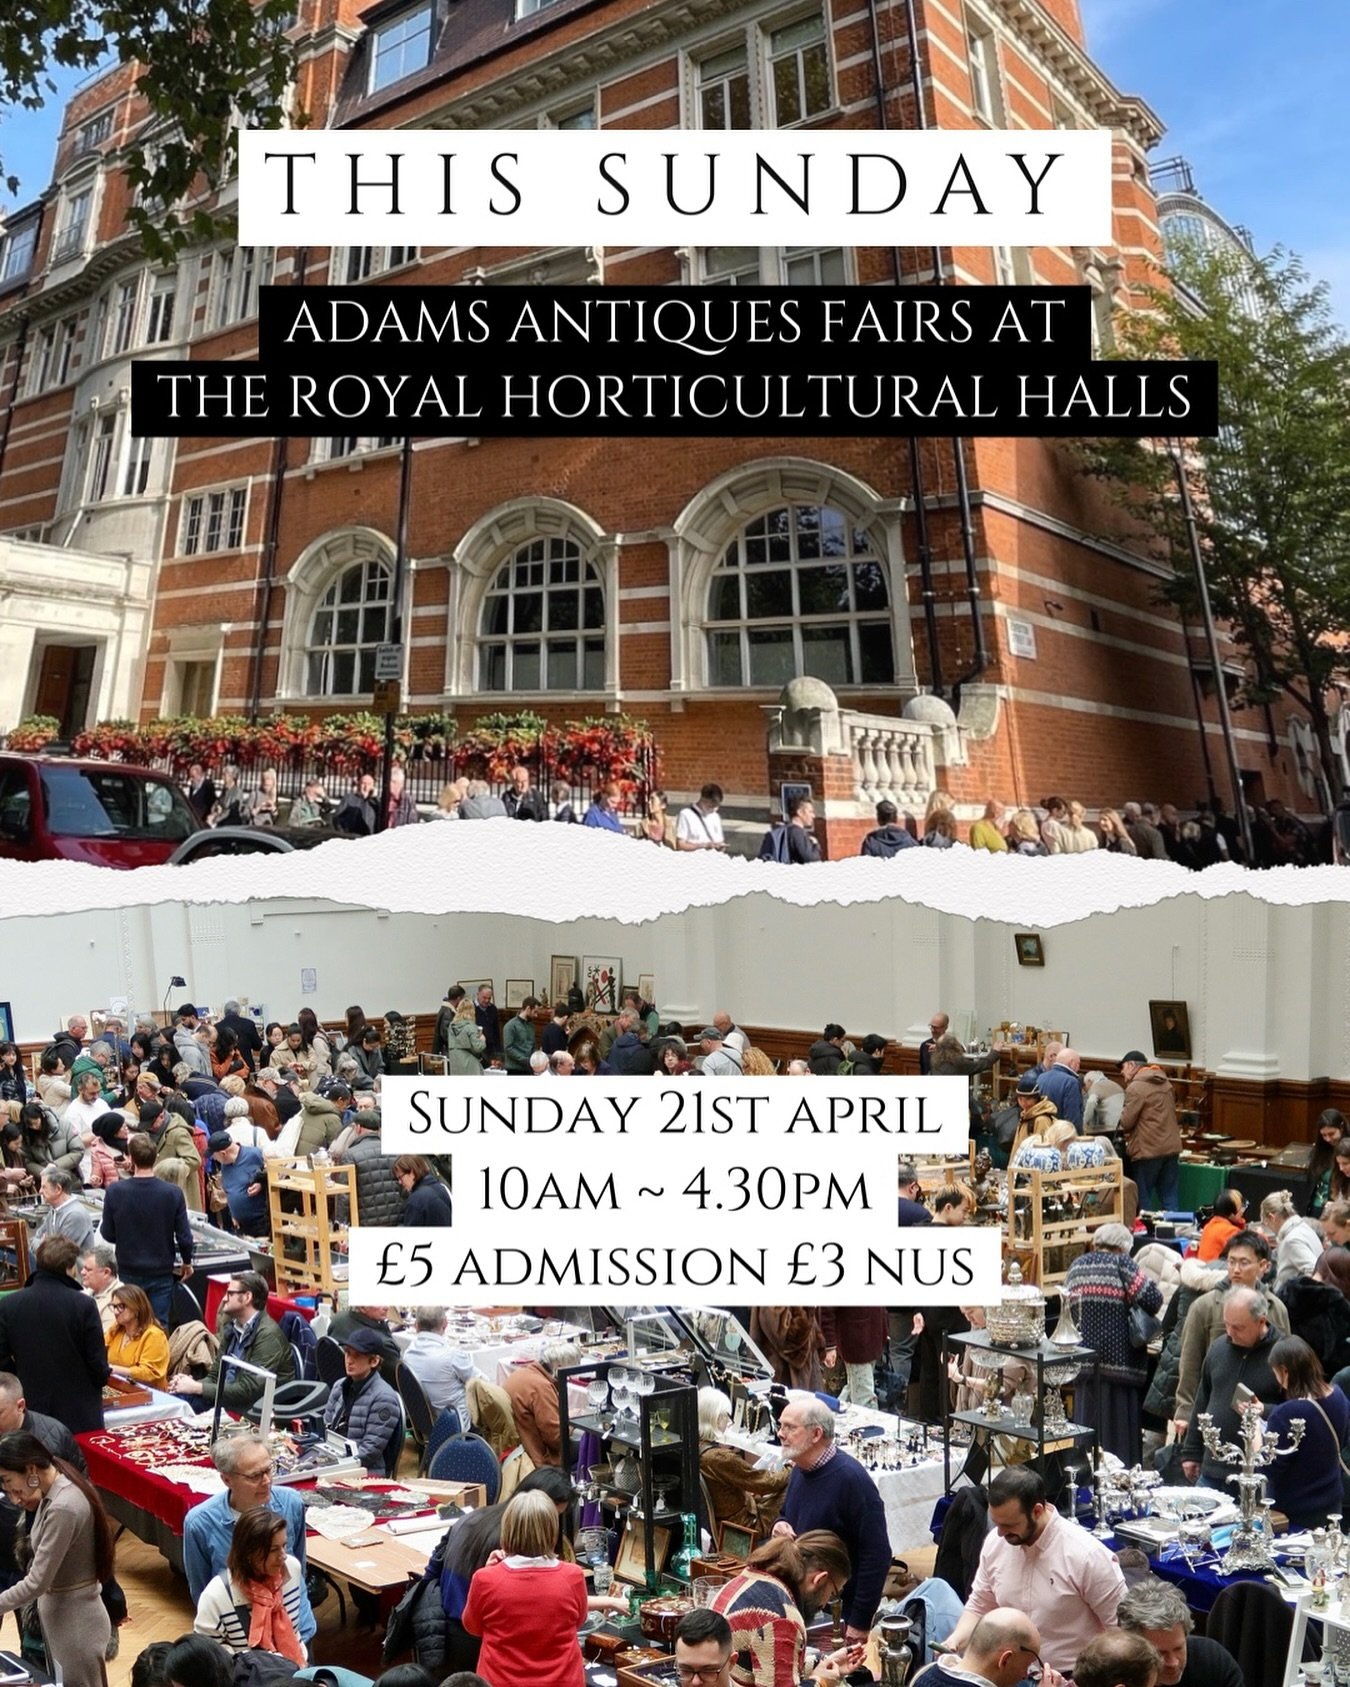 Not long to go until we&rsquo;re back this weekend | April Adams Antiques Fair at The Royal Horticultural Halls. Discover antiques from over 120 exhibitors at our long-established fair in central London. 

Adams Antiques Fairs
Sunday 21st April
10am 